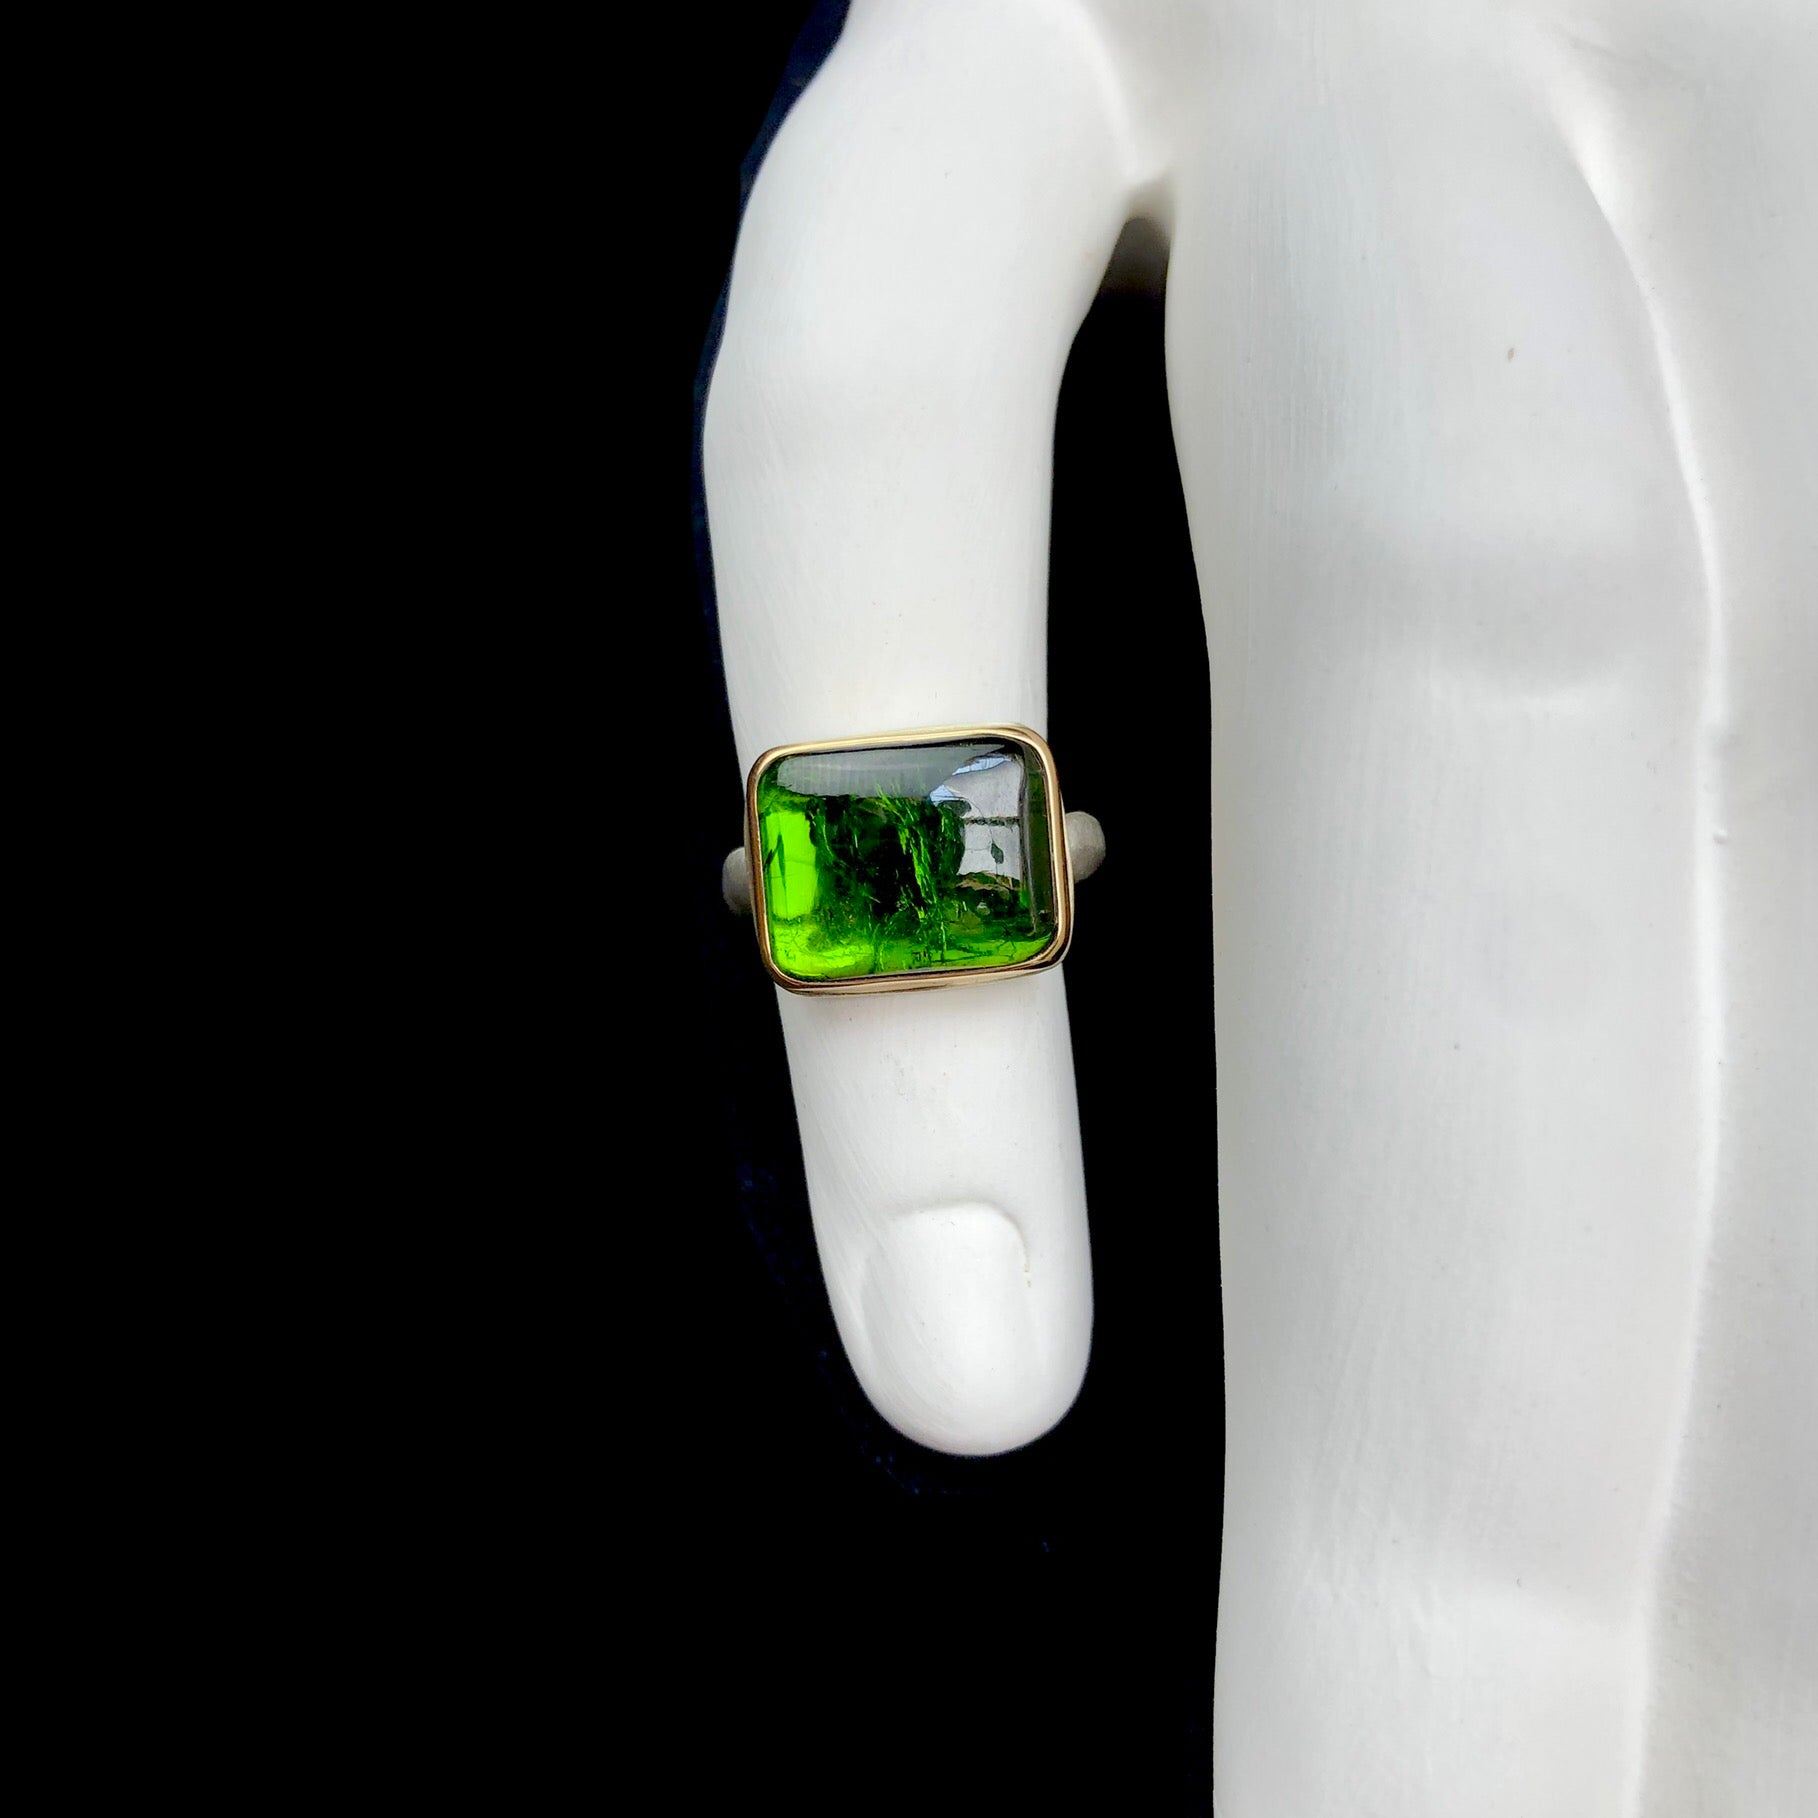 Front top view of Green Tourmaline Ring on white ceramic finger